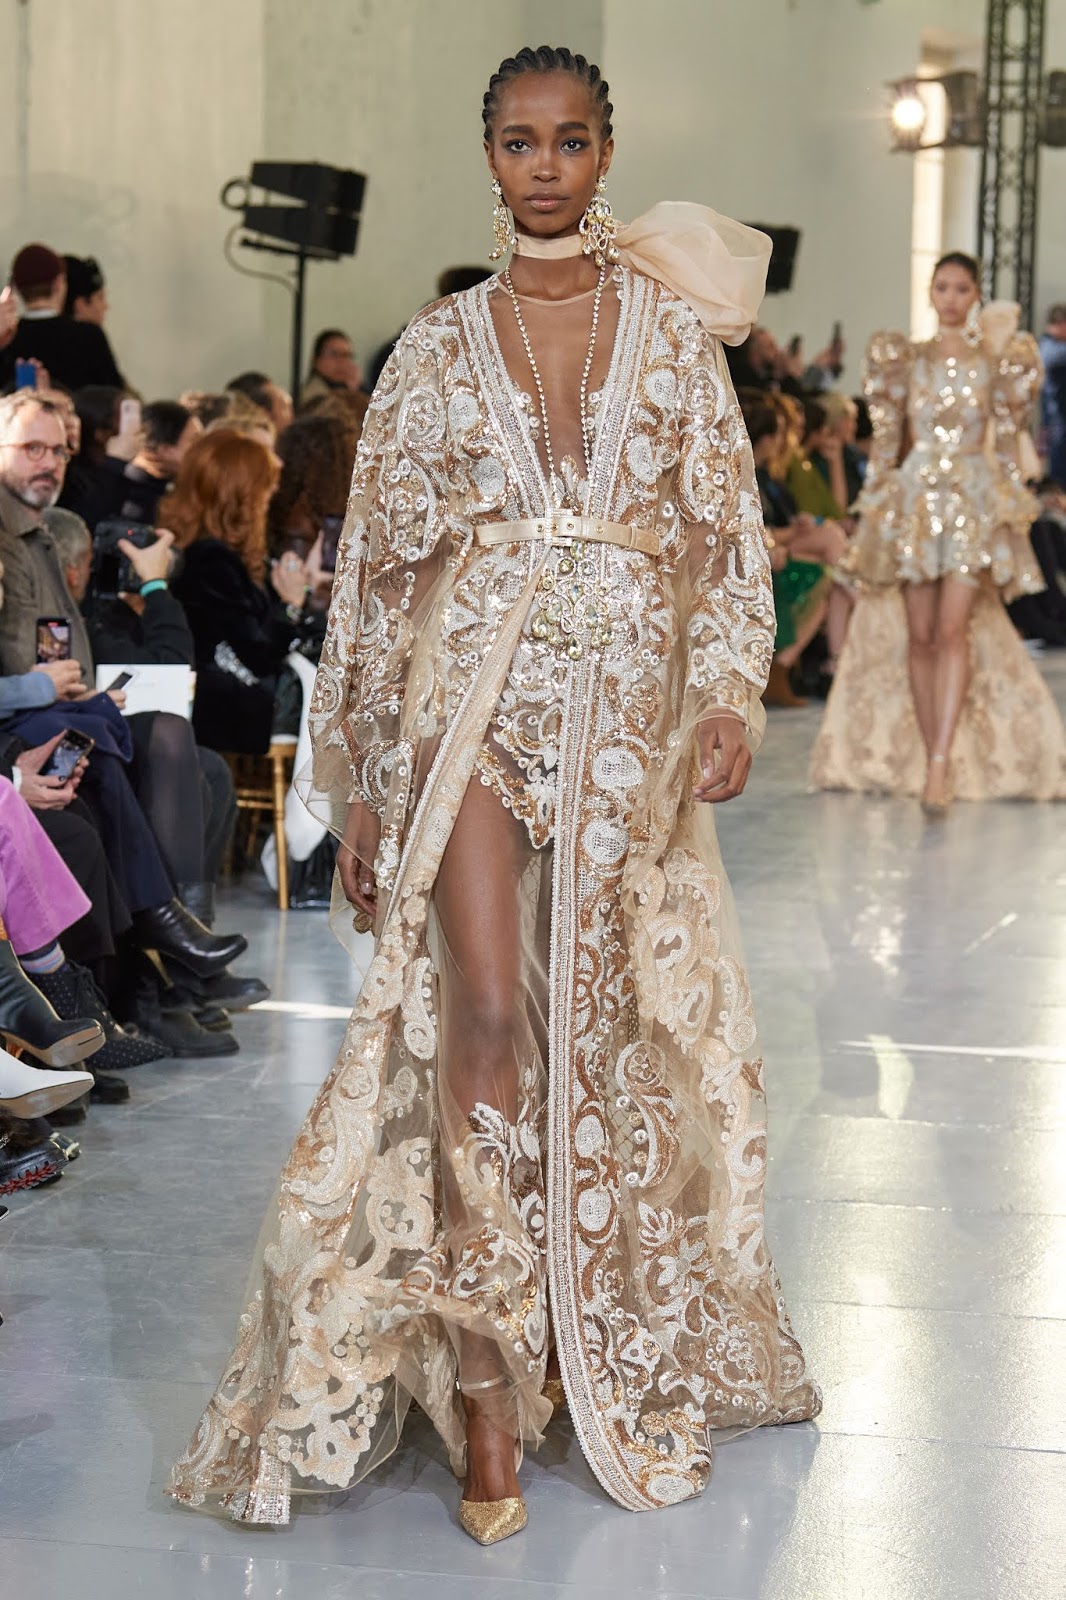 HAUTE COUTURE : ELIE SAAB April 11, 2020 | ZsaZsa Bellagio - Like No Other